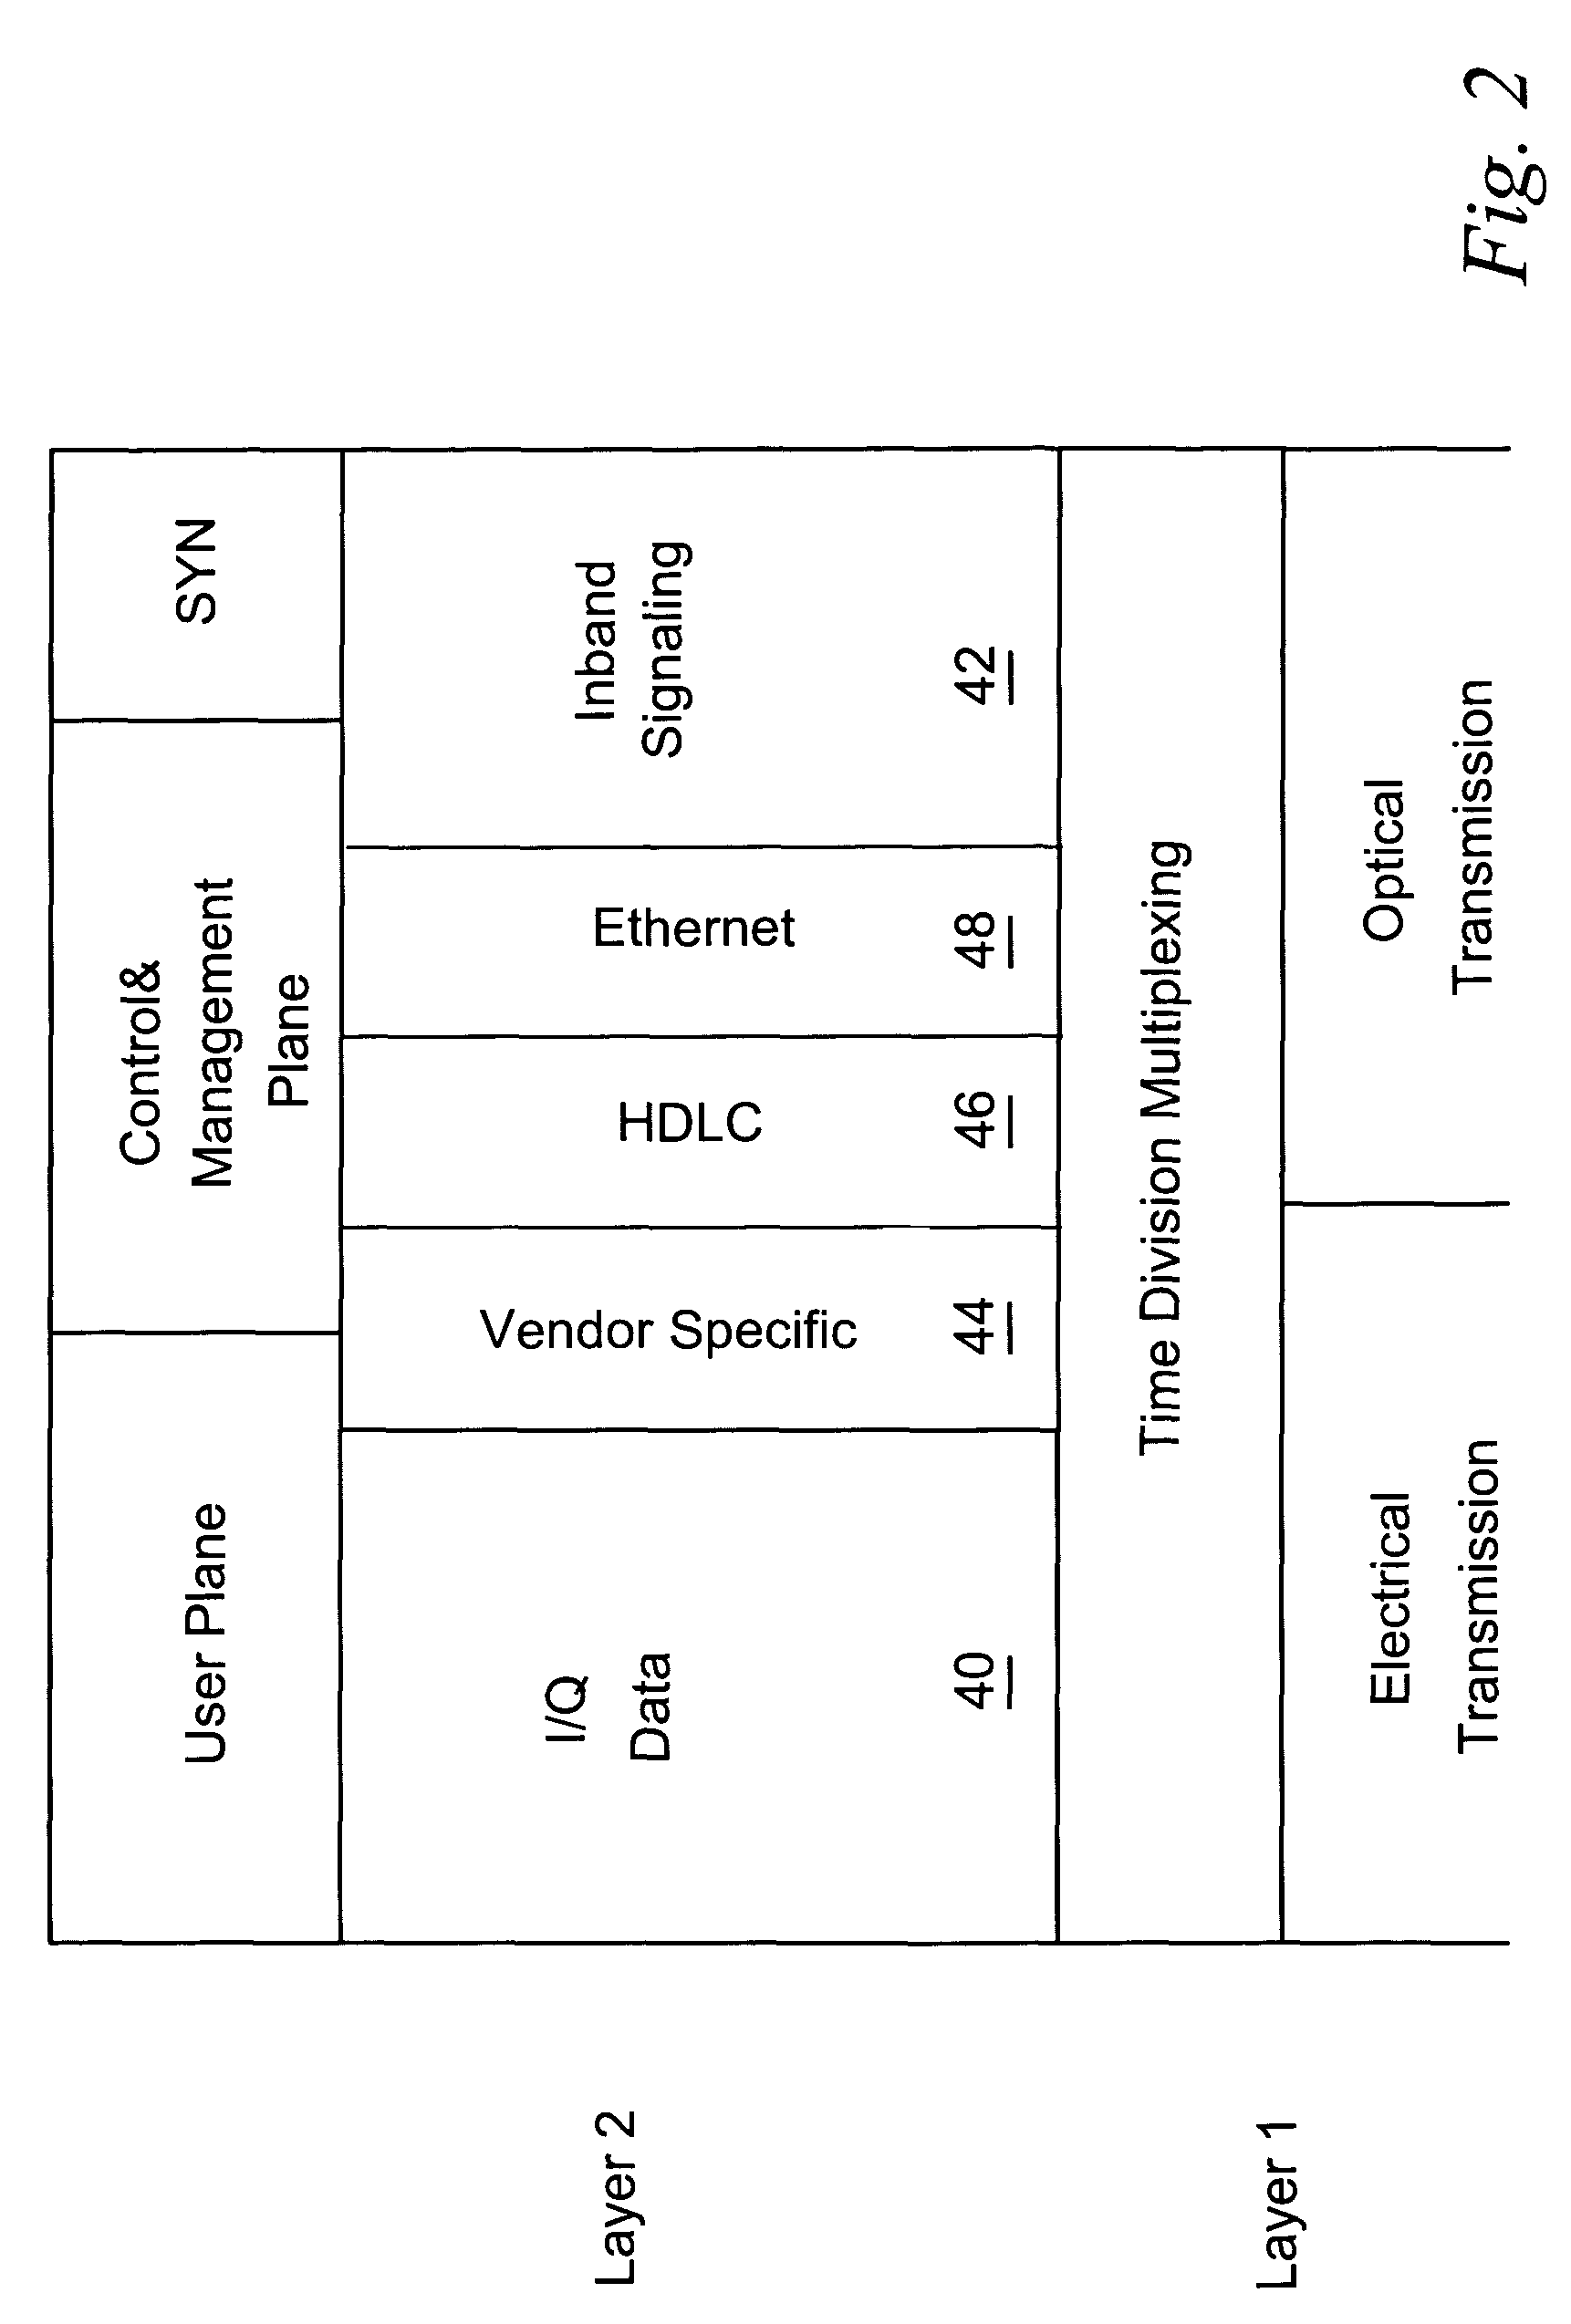 Pre-start-up procedure for internal interface of distributed radio base station